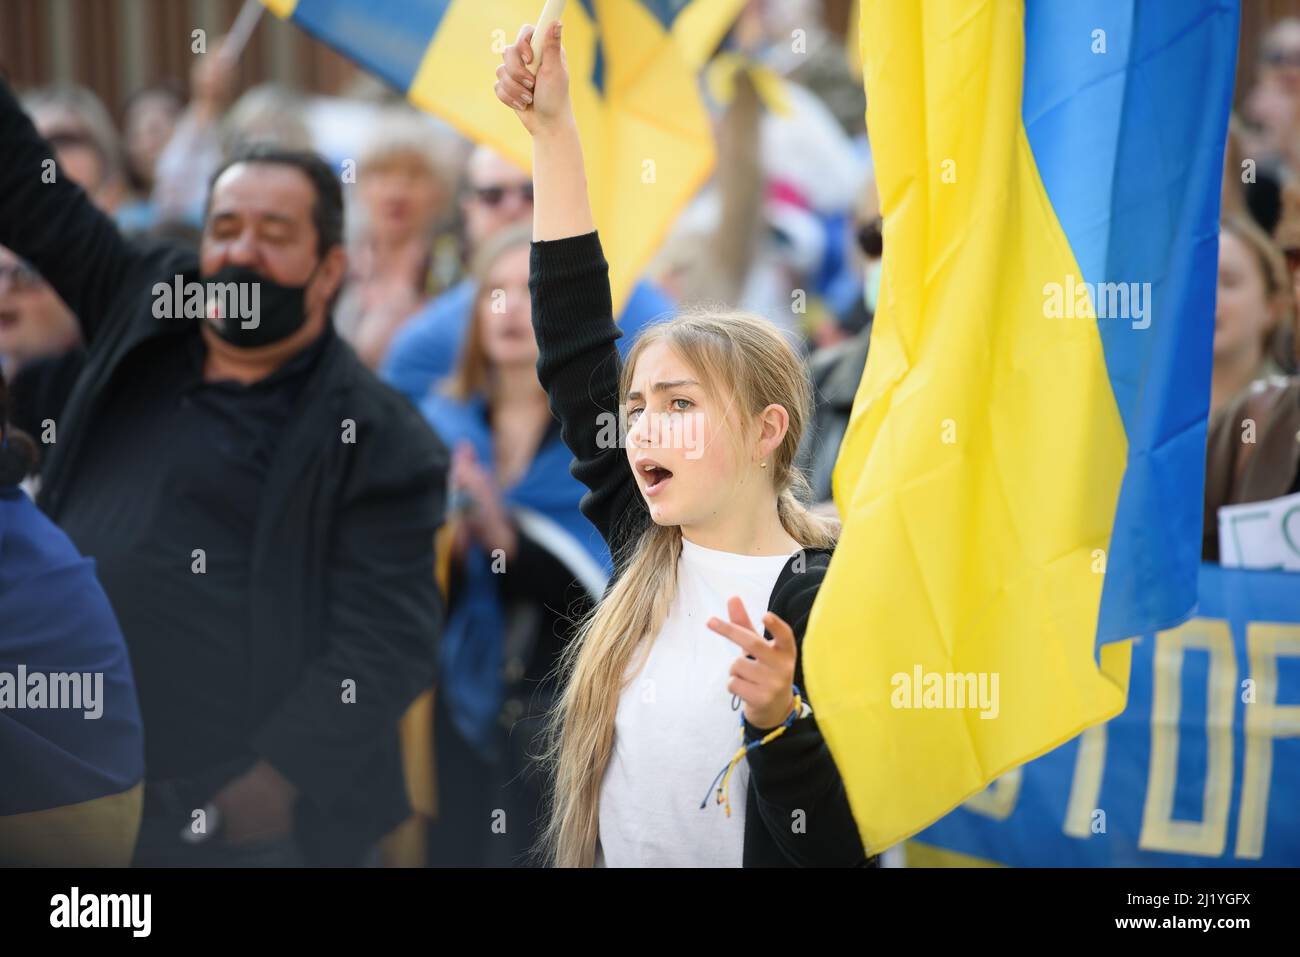 Nicosia, Cyprus - March 27, 2022: Young female protester shouts holding Ukranian flag at a rally against the Russian invasion of Ukraine Stock Photo